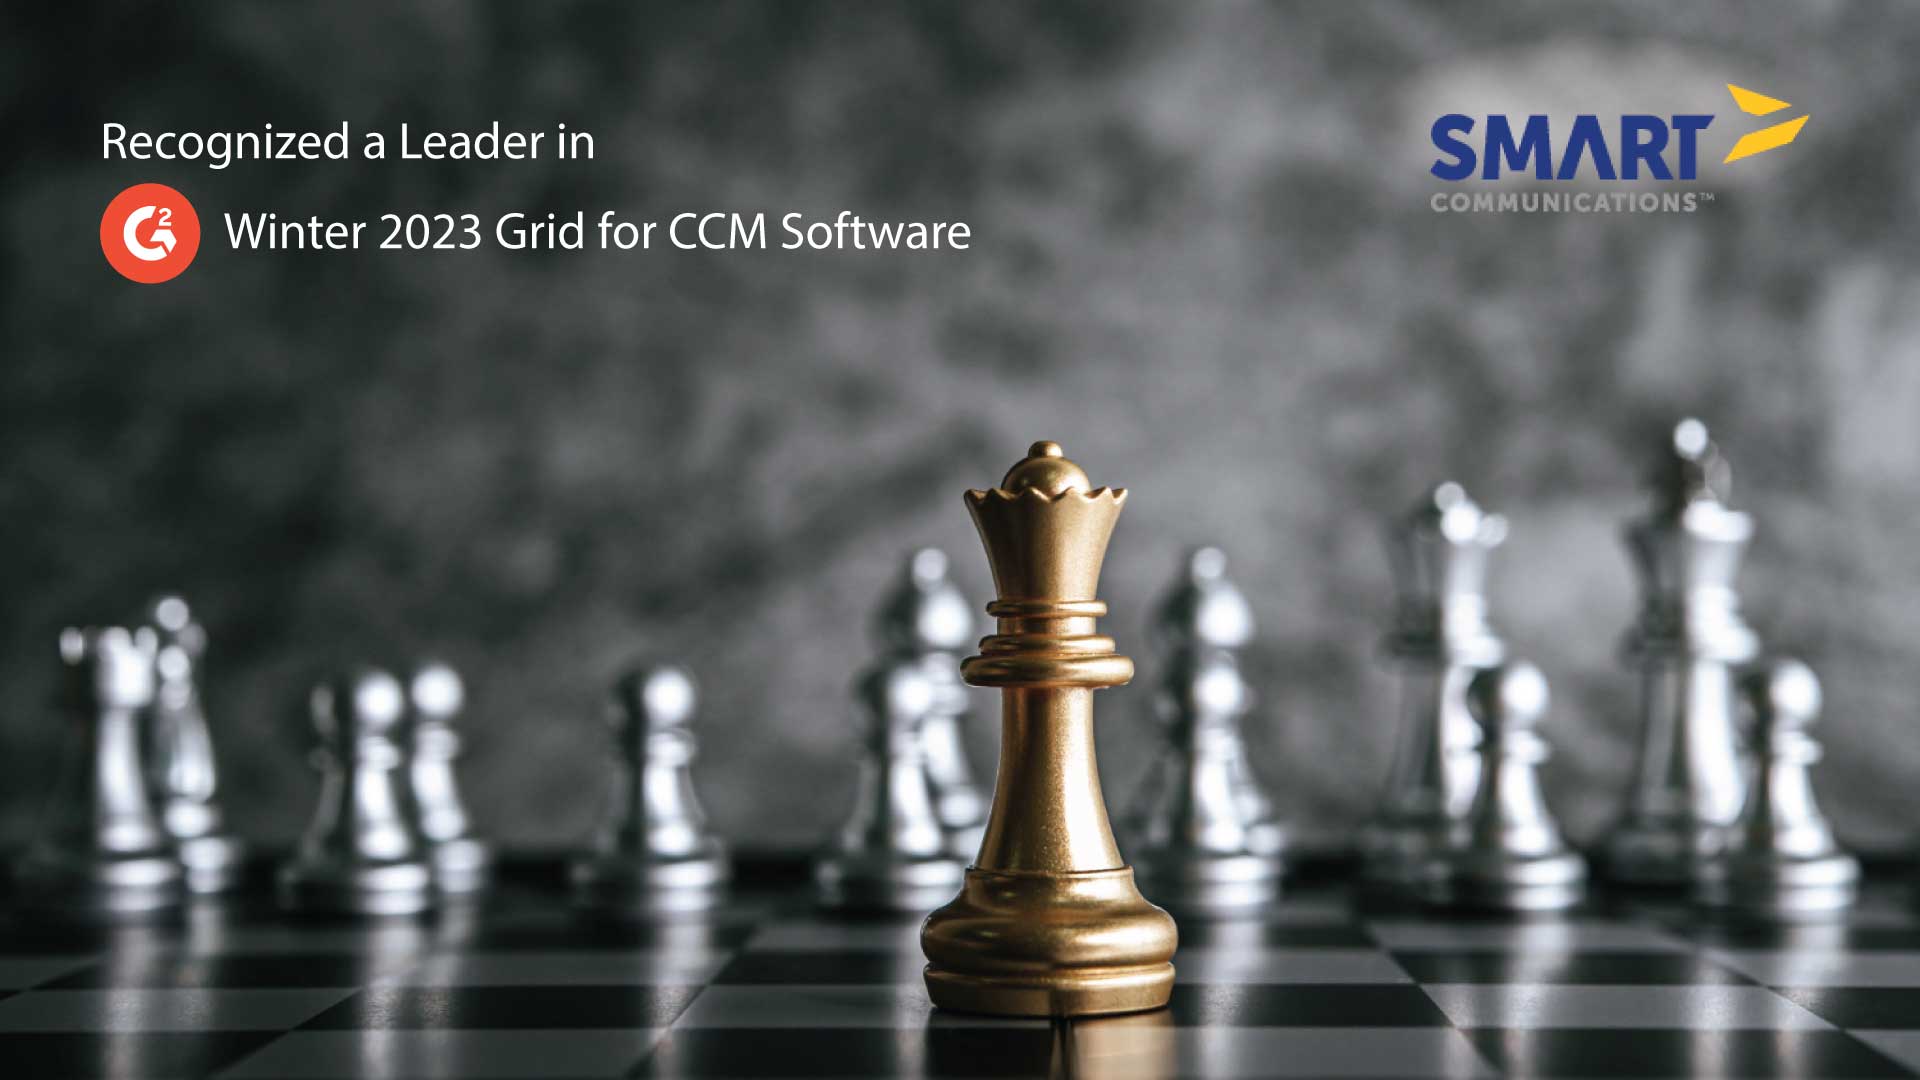 Smart Communications Recognized as a Leader in the G2 Winter 2023 Grid for Customer Communications Management Software